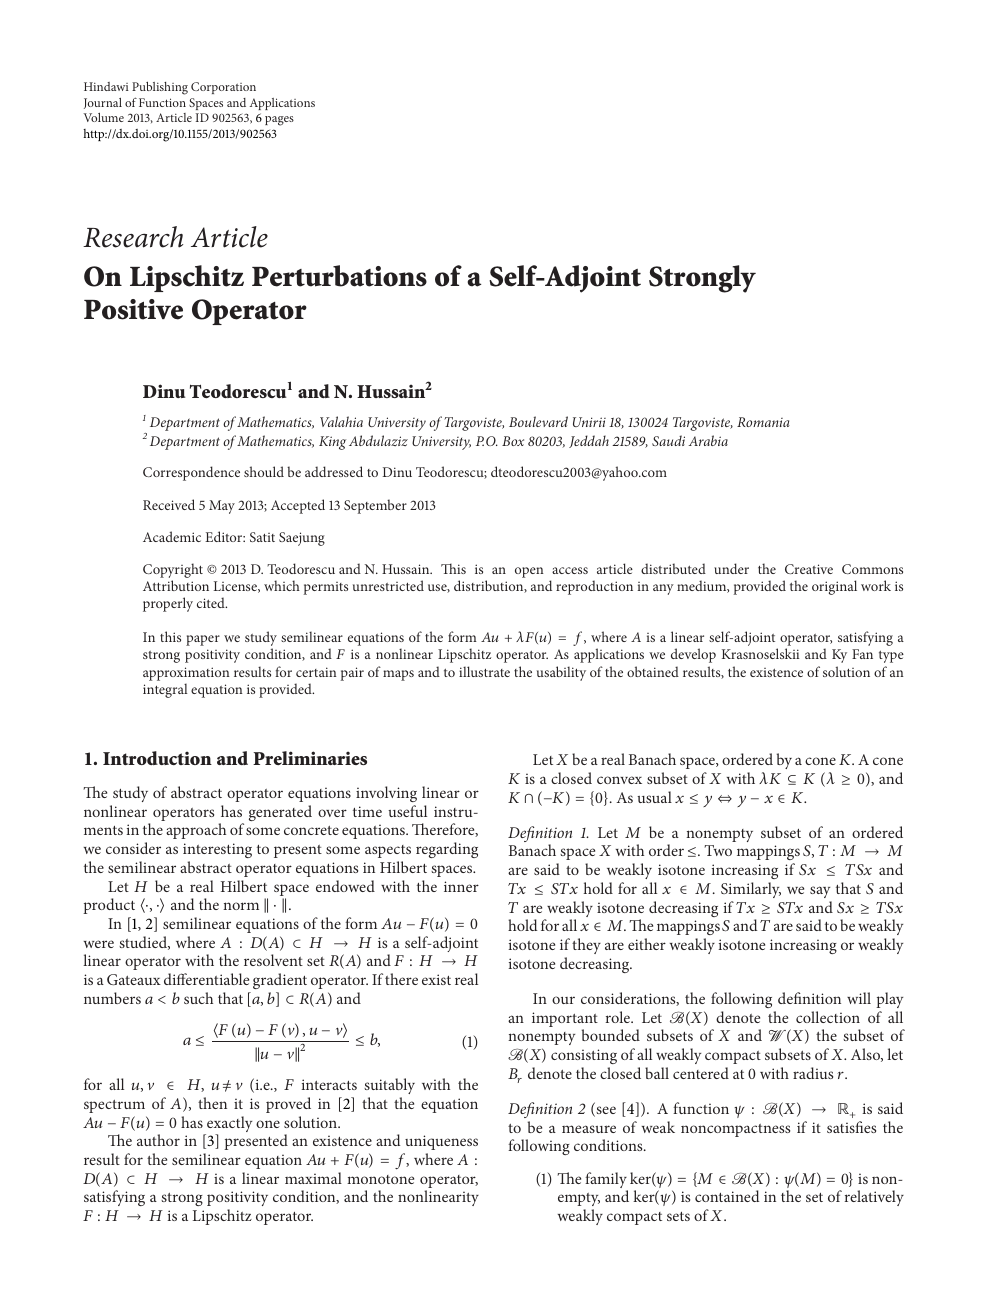 On Lipschitz Perturbations Of A Self Adjoint Strongly Positive Operator Topic Of Research Paper In Mathematics Download Scholarly Article Pdf And Read For Free On Cyberleninka Open Science Hub